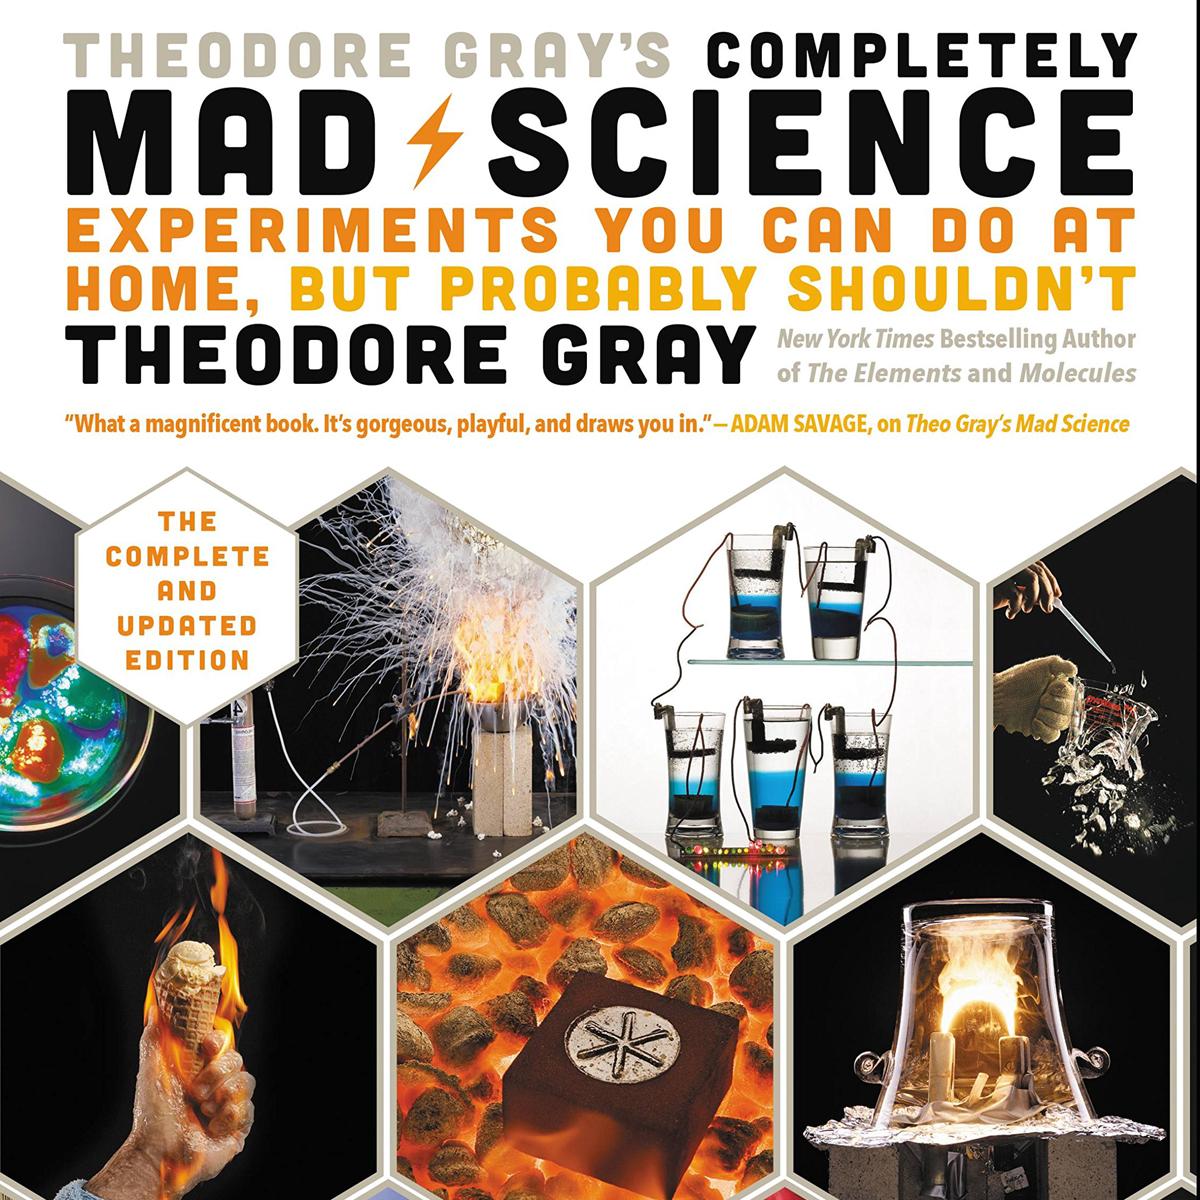 Theodore Grays Completely Mad Science eBook for $2.99